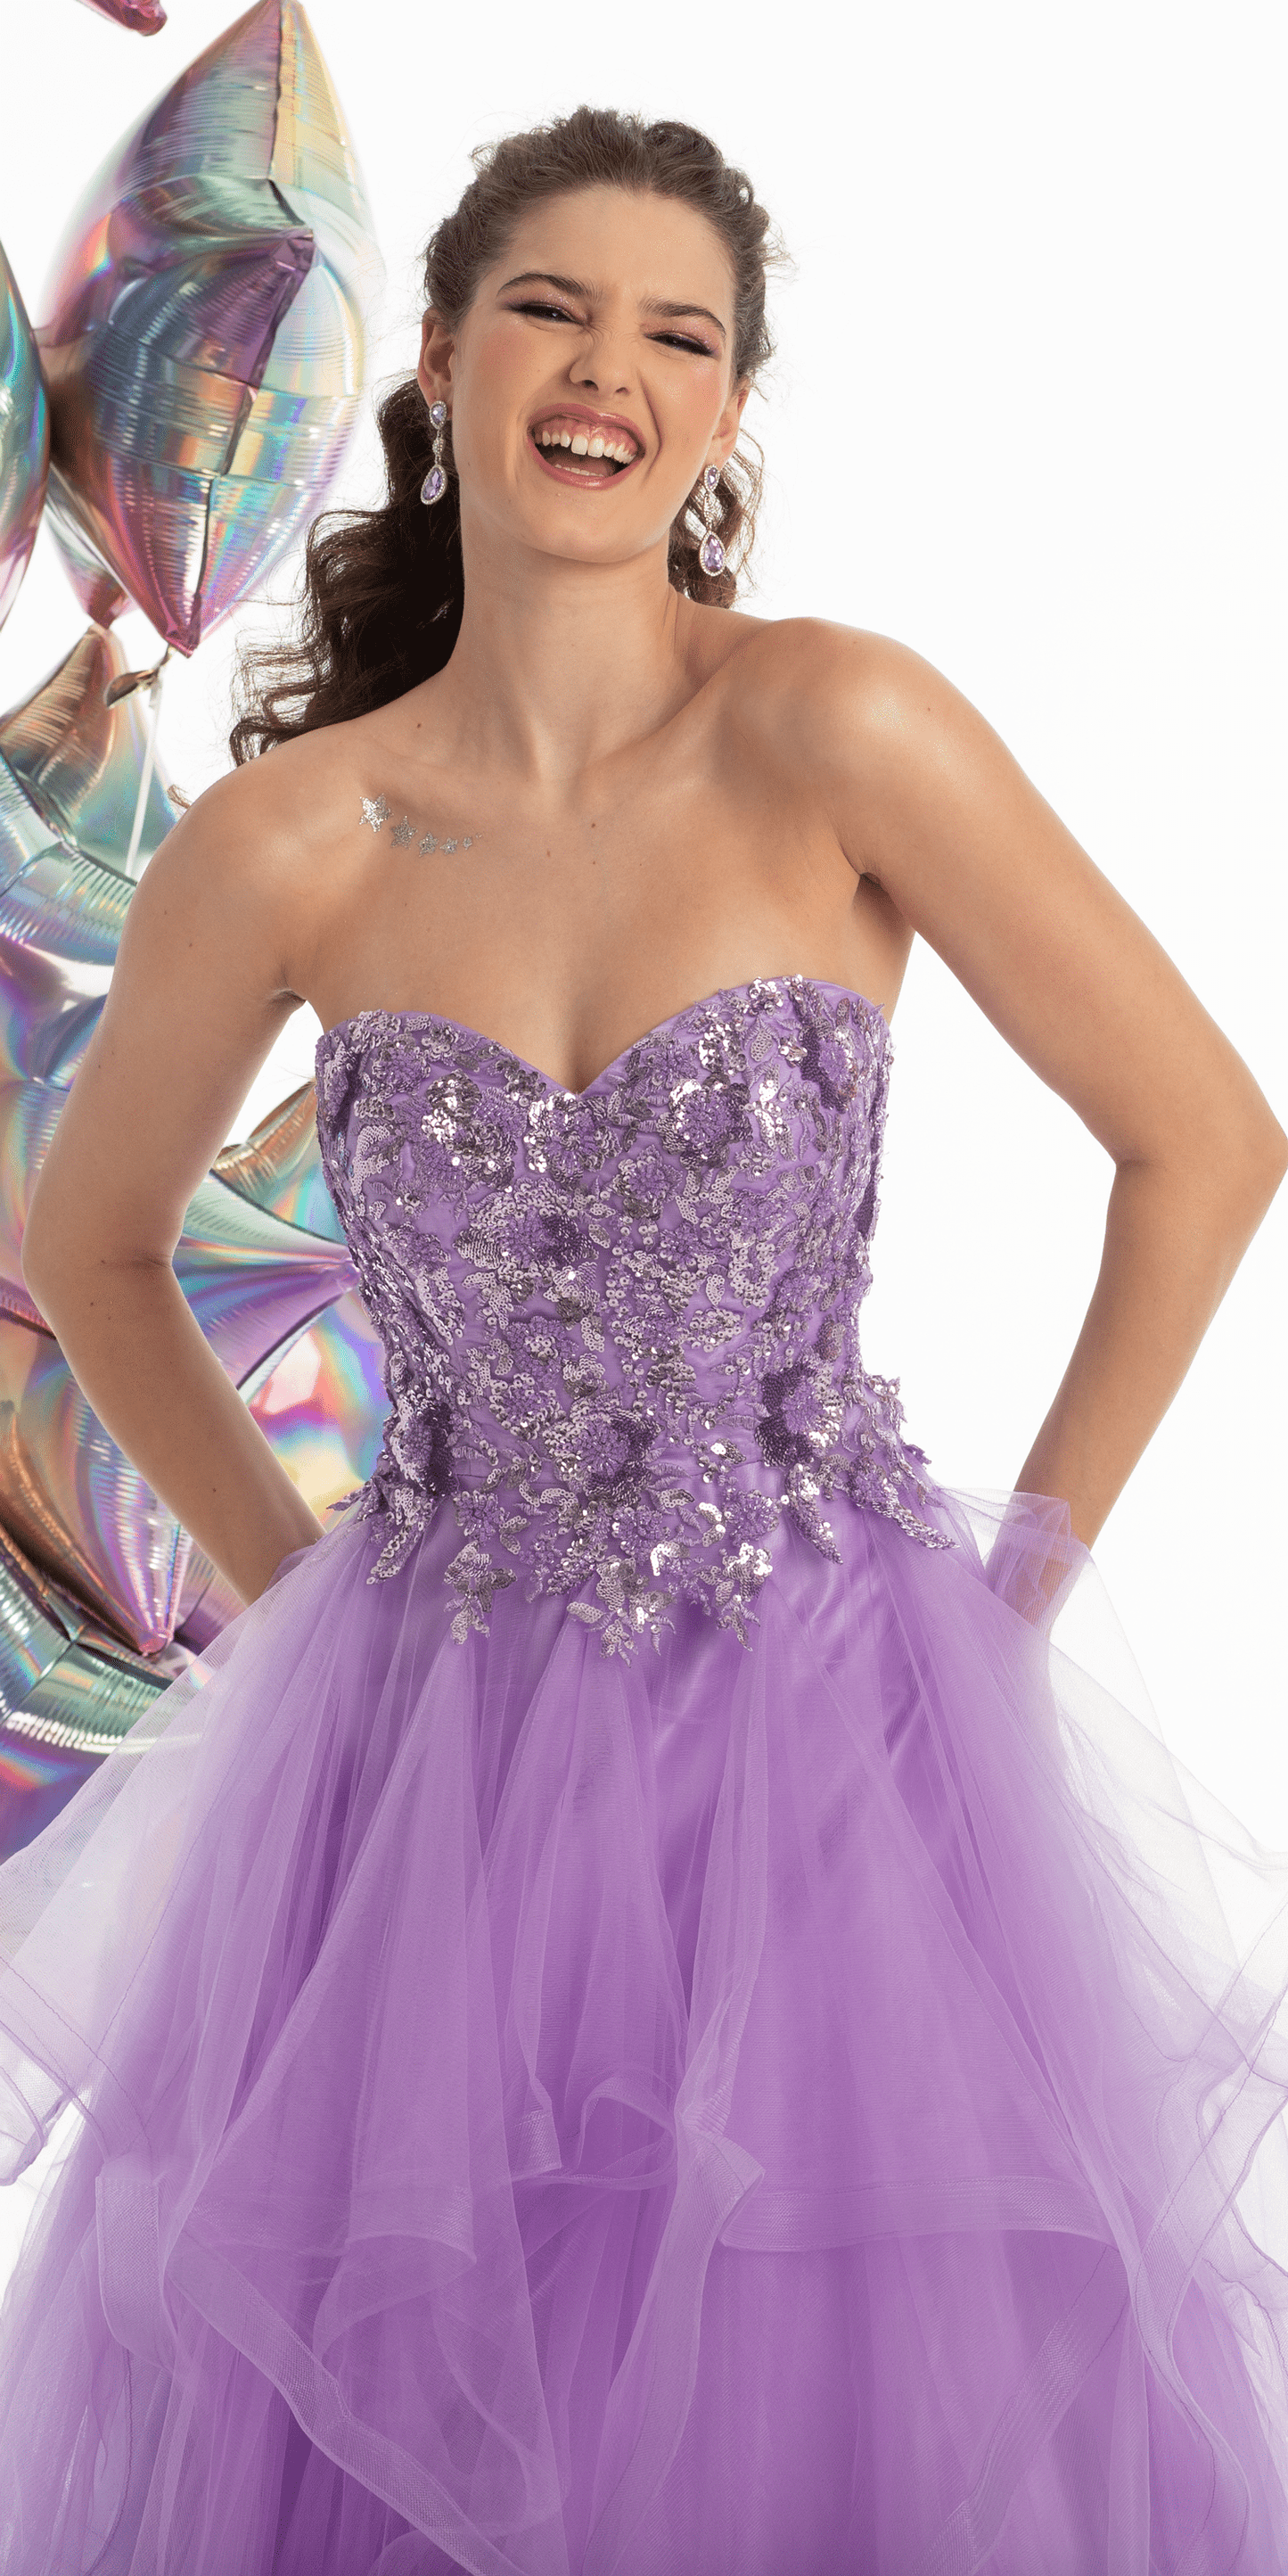 Camille La Vie Tulle Sweetheart Floral Sequin Tiered Ballgown